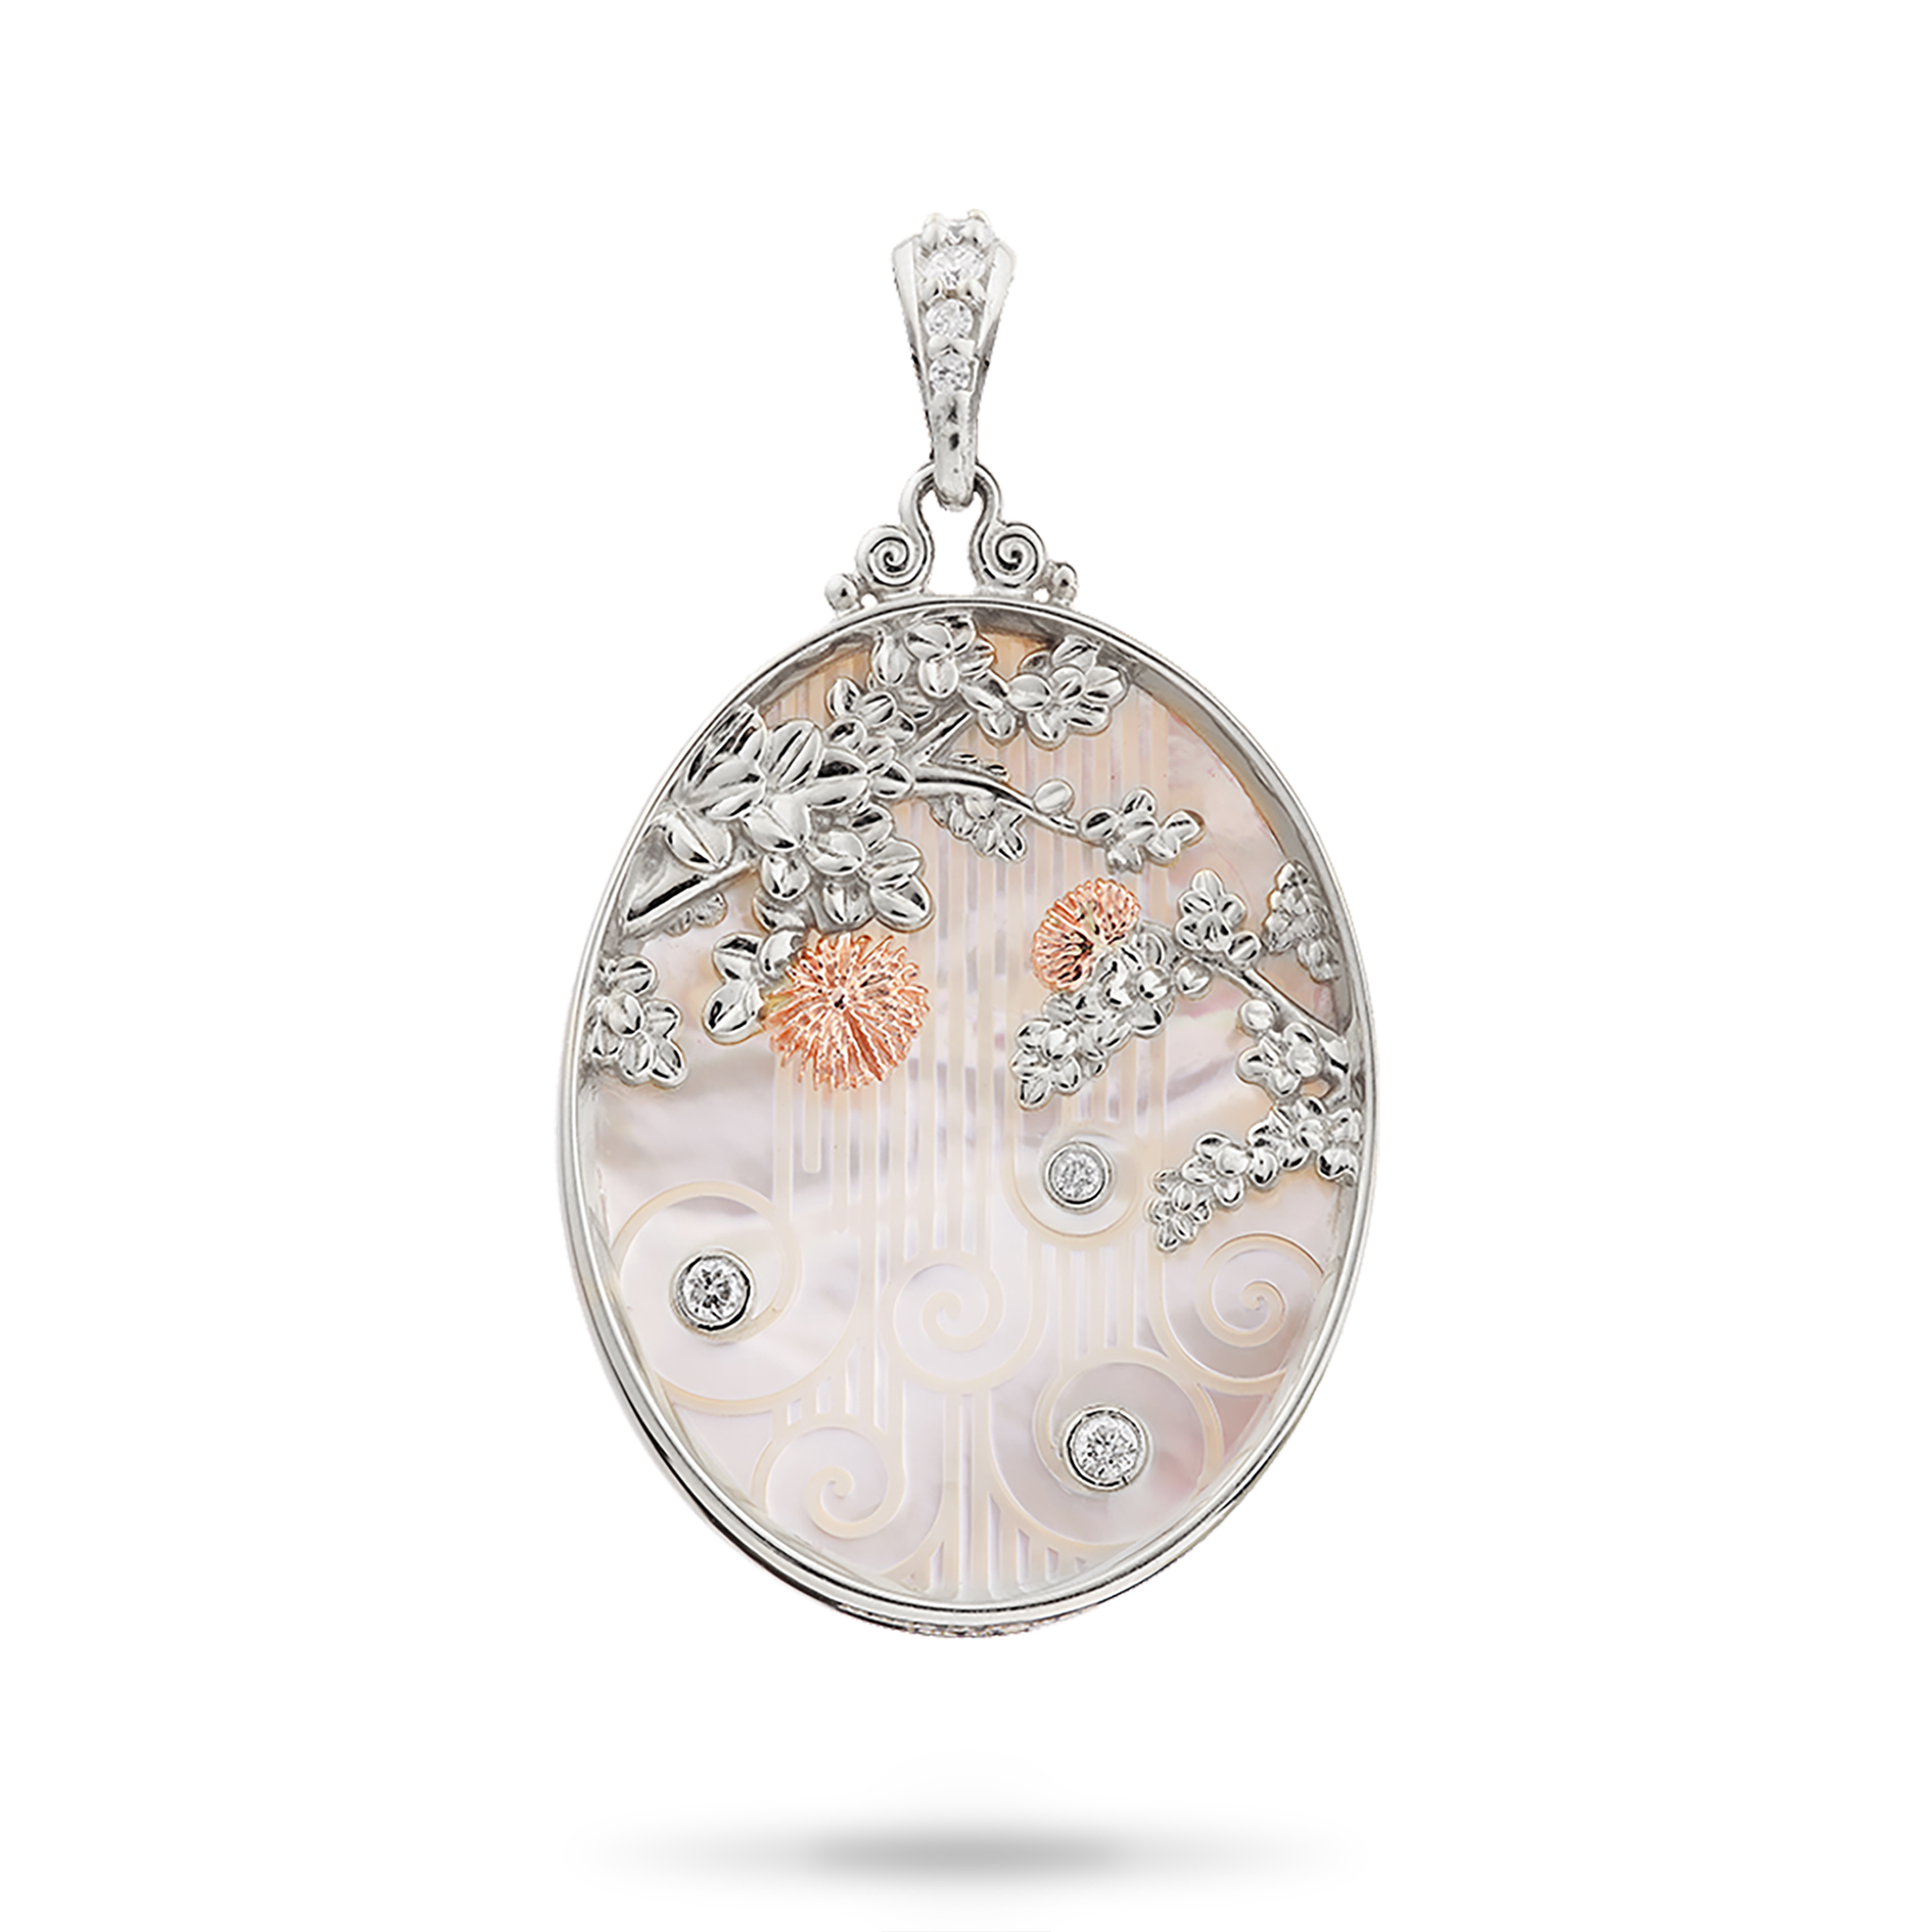 ʻŌhiʻa Lehua Waterfall Mother of Pearl Pendant in Two Tone Gold with Diamonds